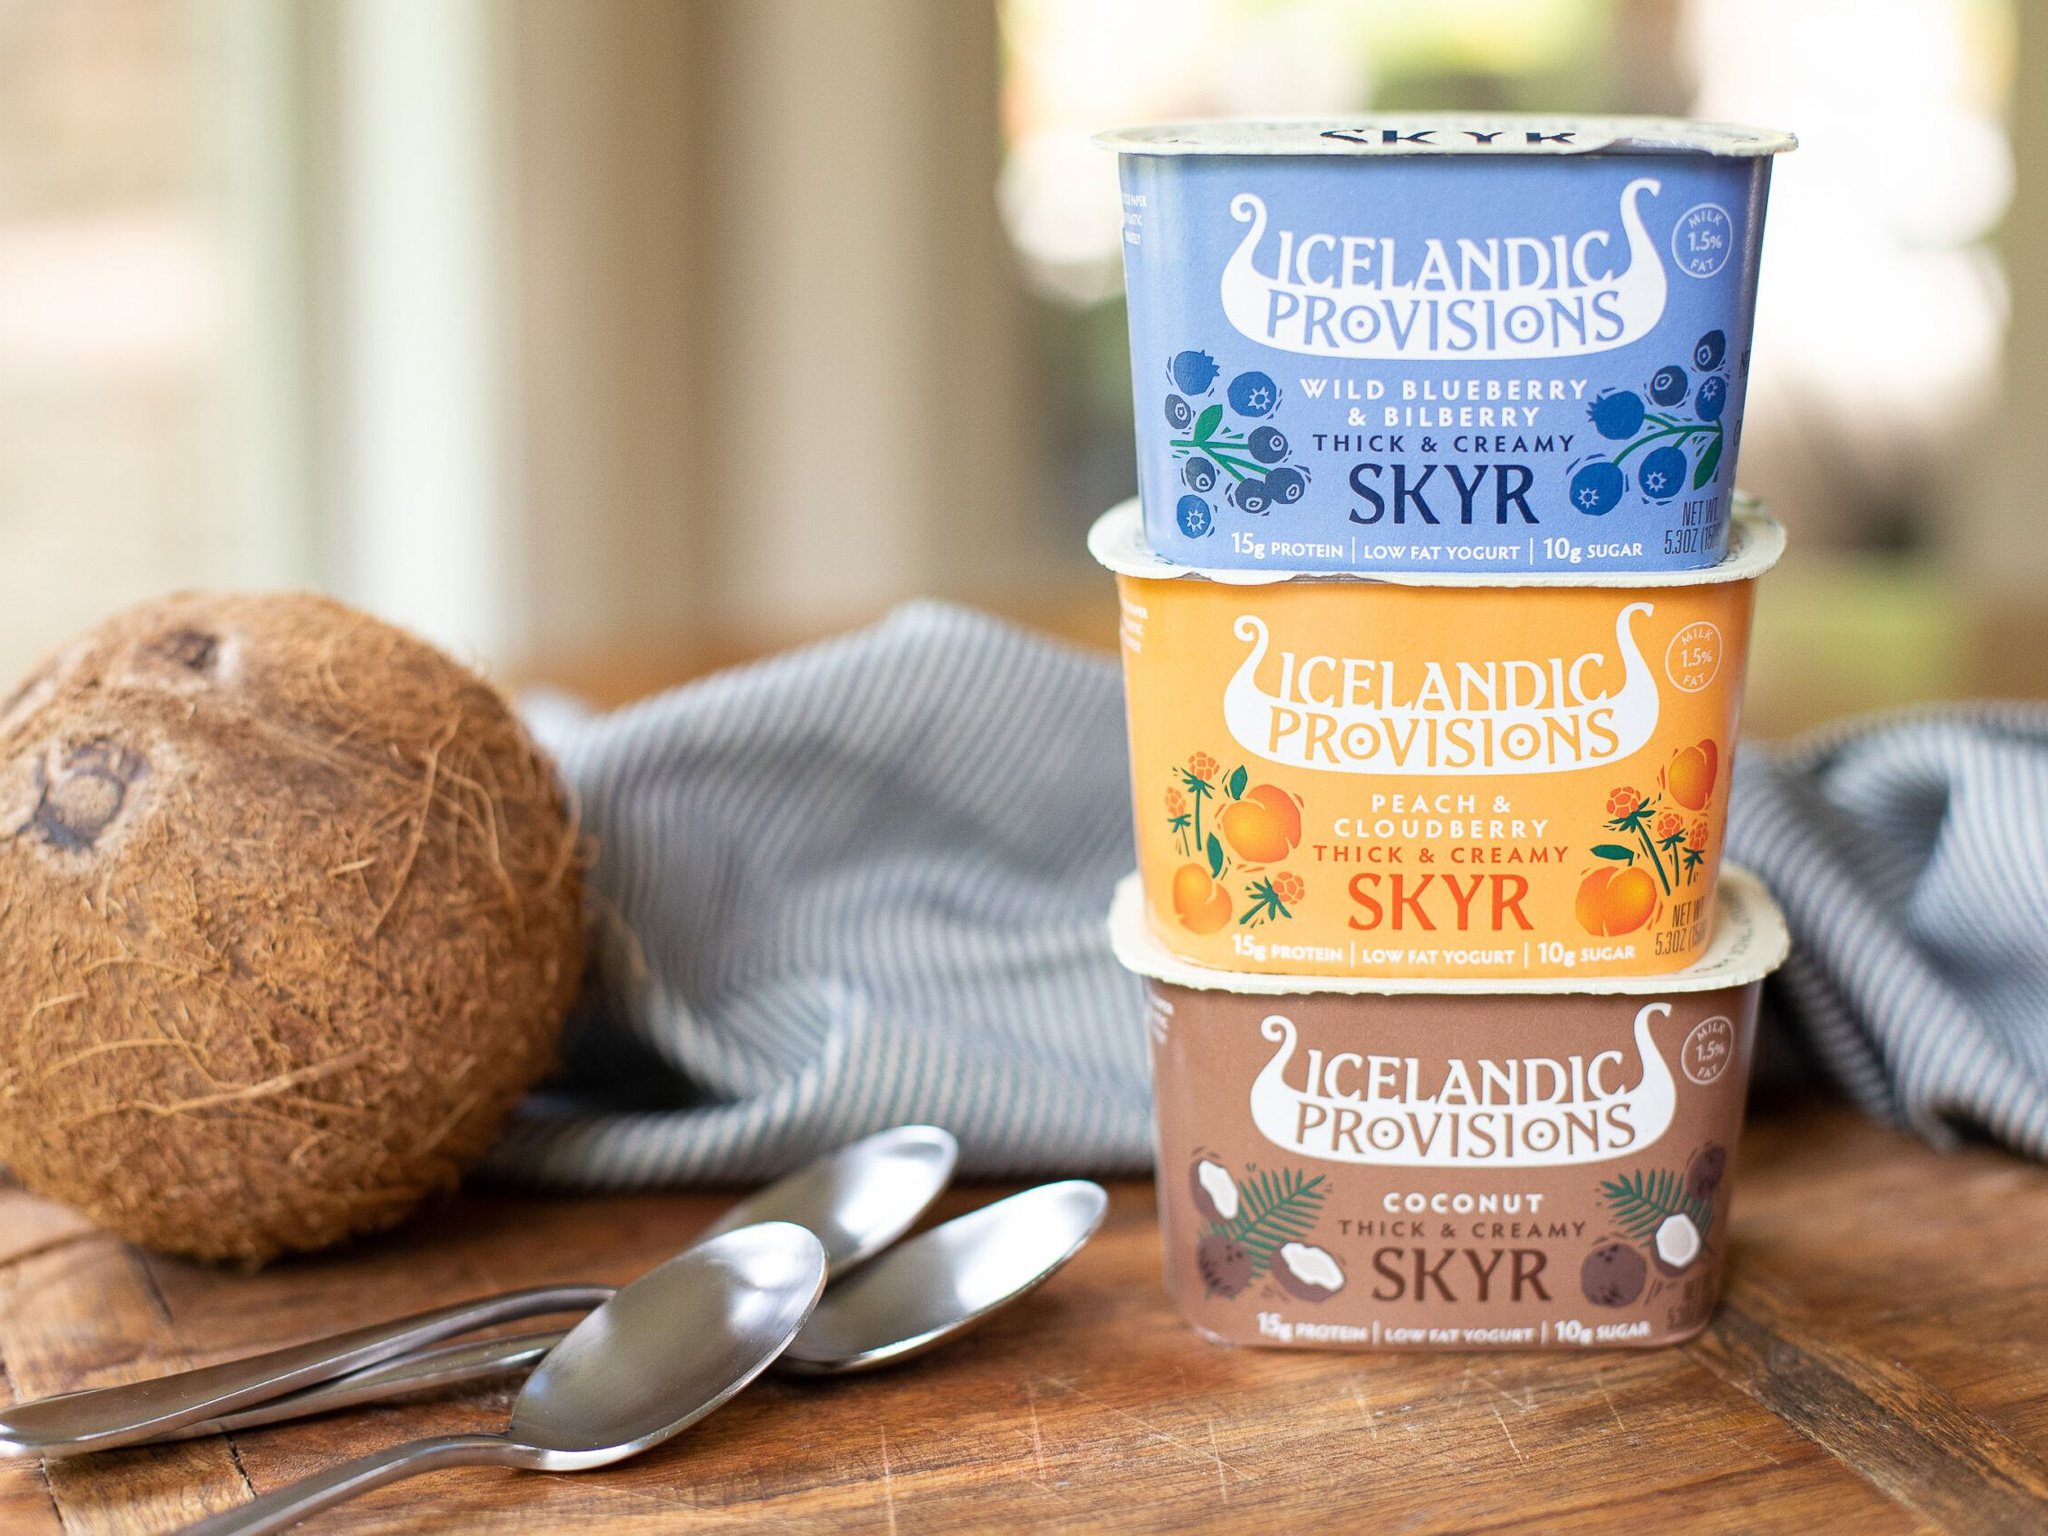 Icelandic Provisions Skyr As Low As 50¢ At Publix